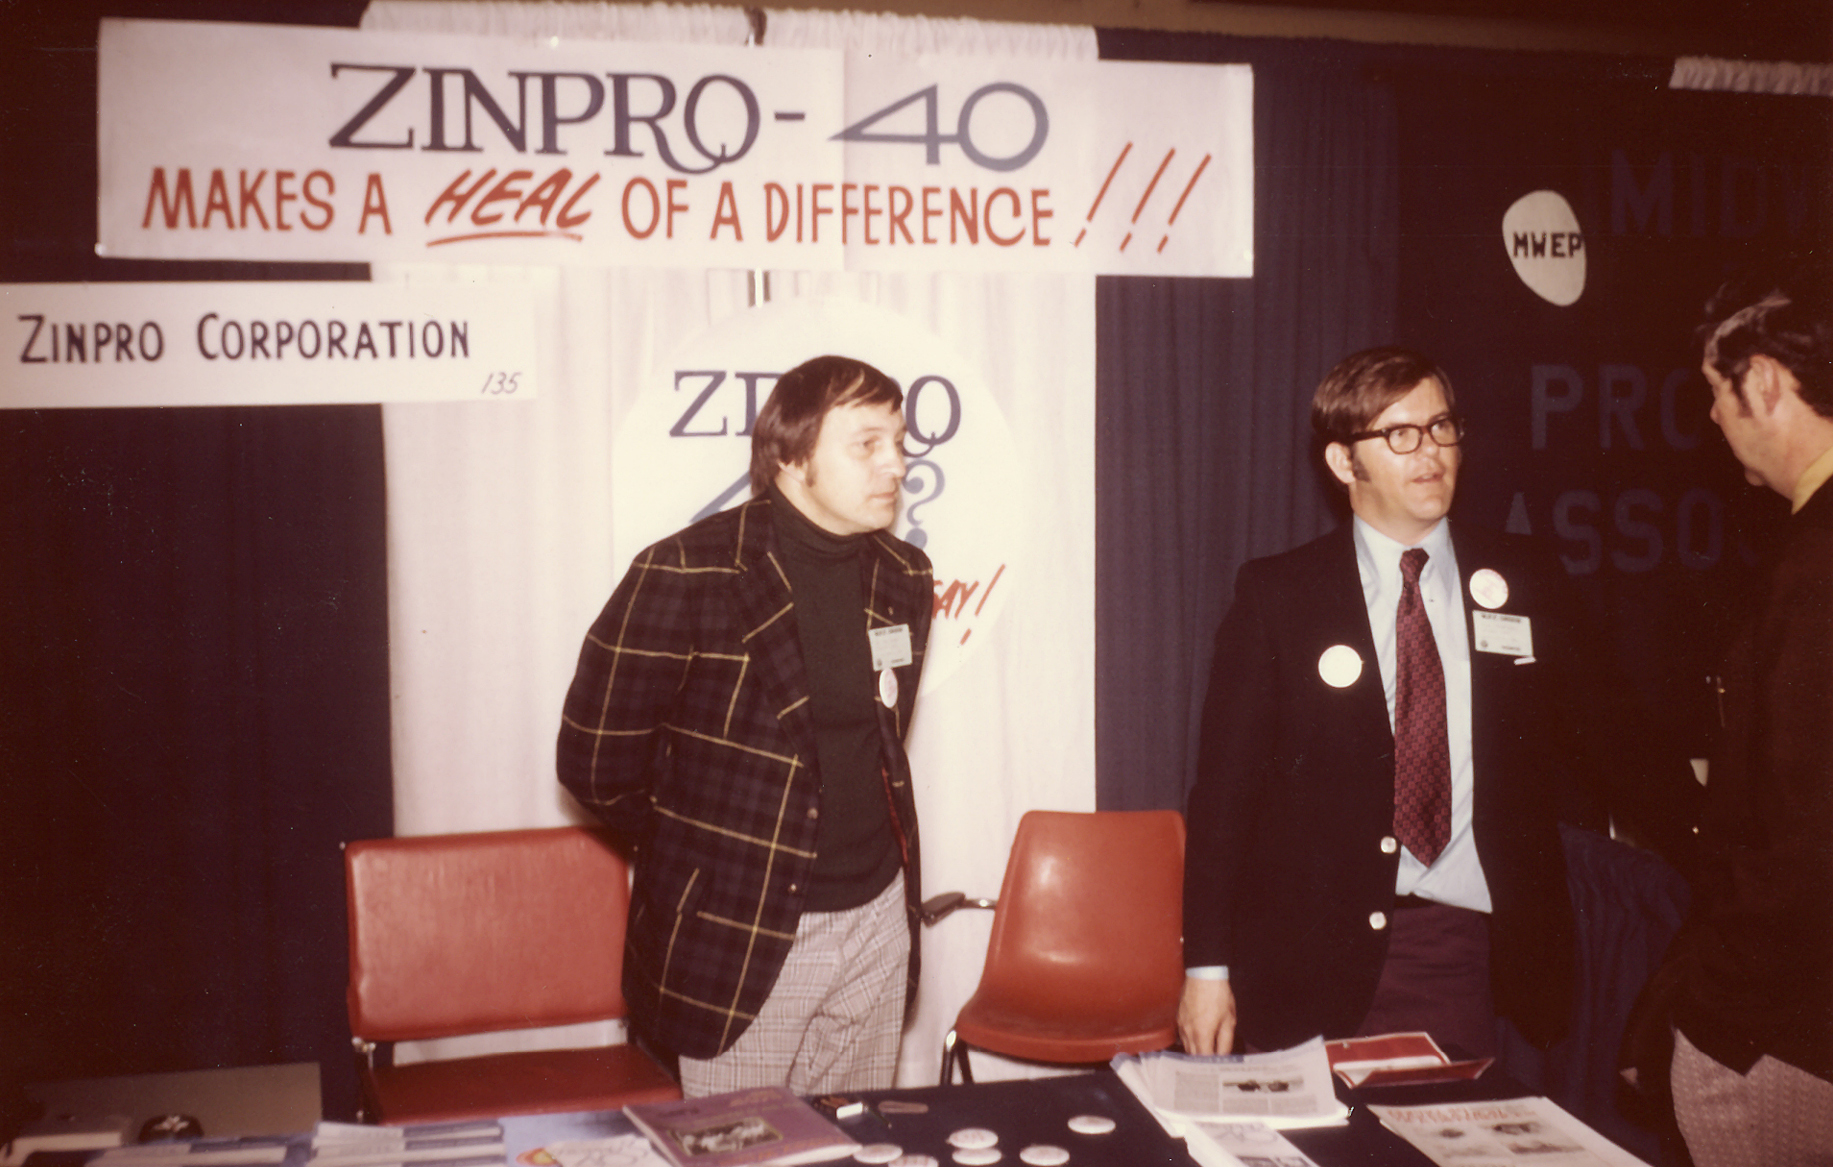 Founders Dean and Mary Anderson officially incorporate Zinpro in 1971